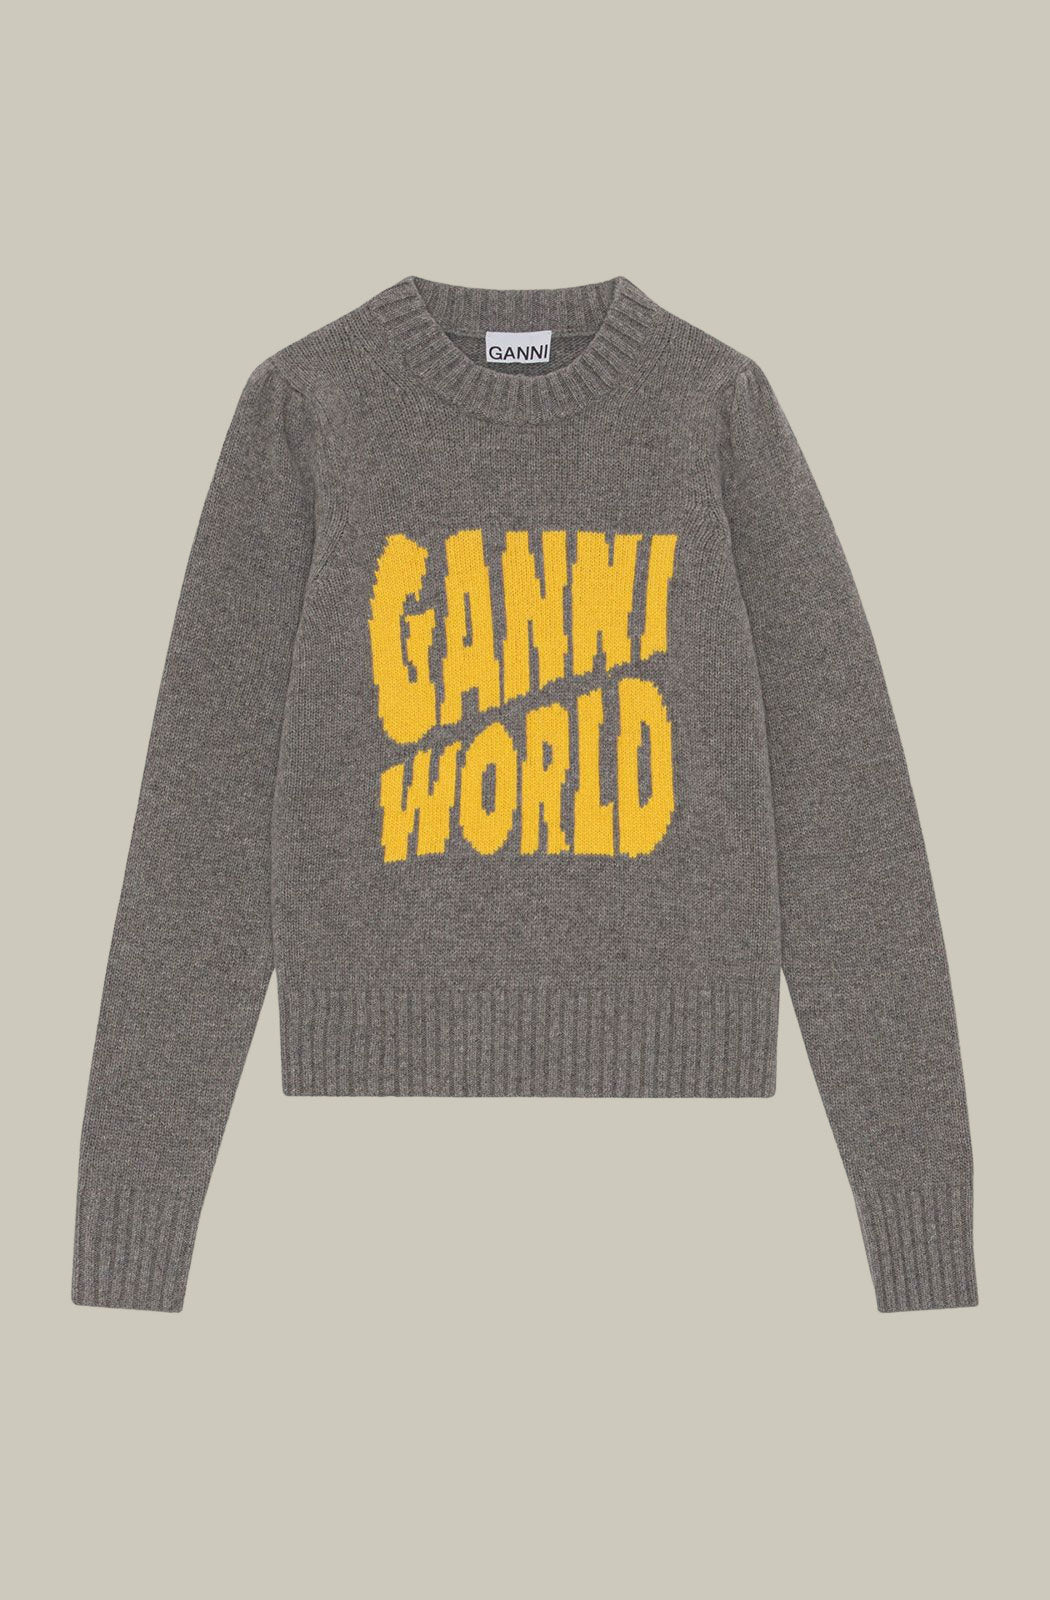 Graphic Pullover by Ganni it's made from a blend of certified recycled wool. The pullover is designed for a straight fit and features a round neckline, puff shoulders, GANNI world graphic and ribbed edges.